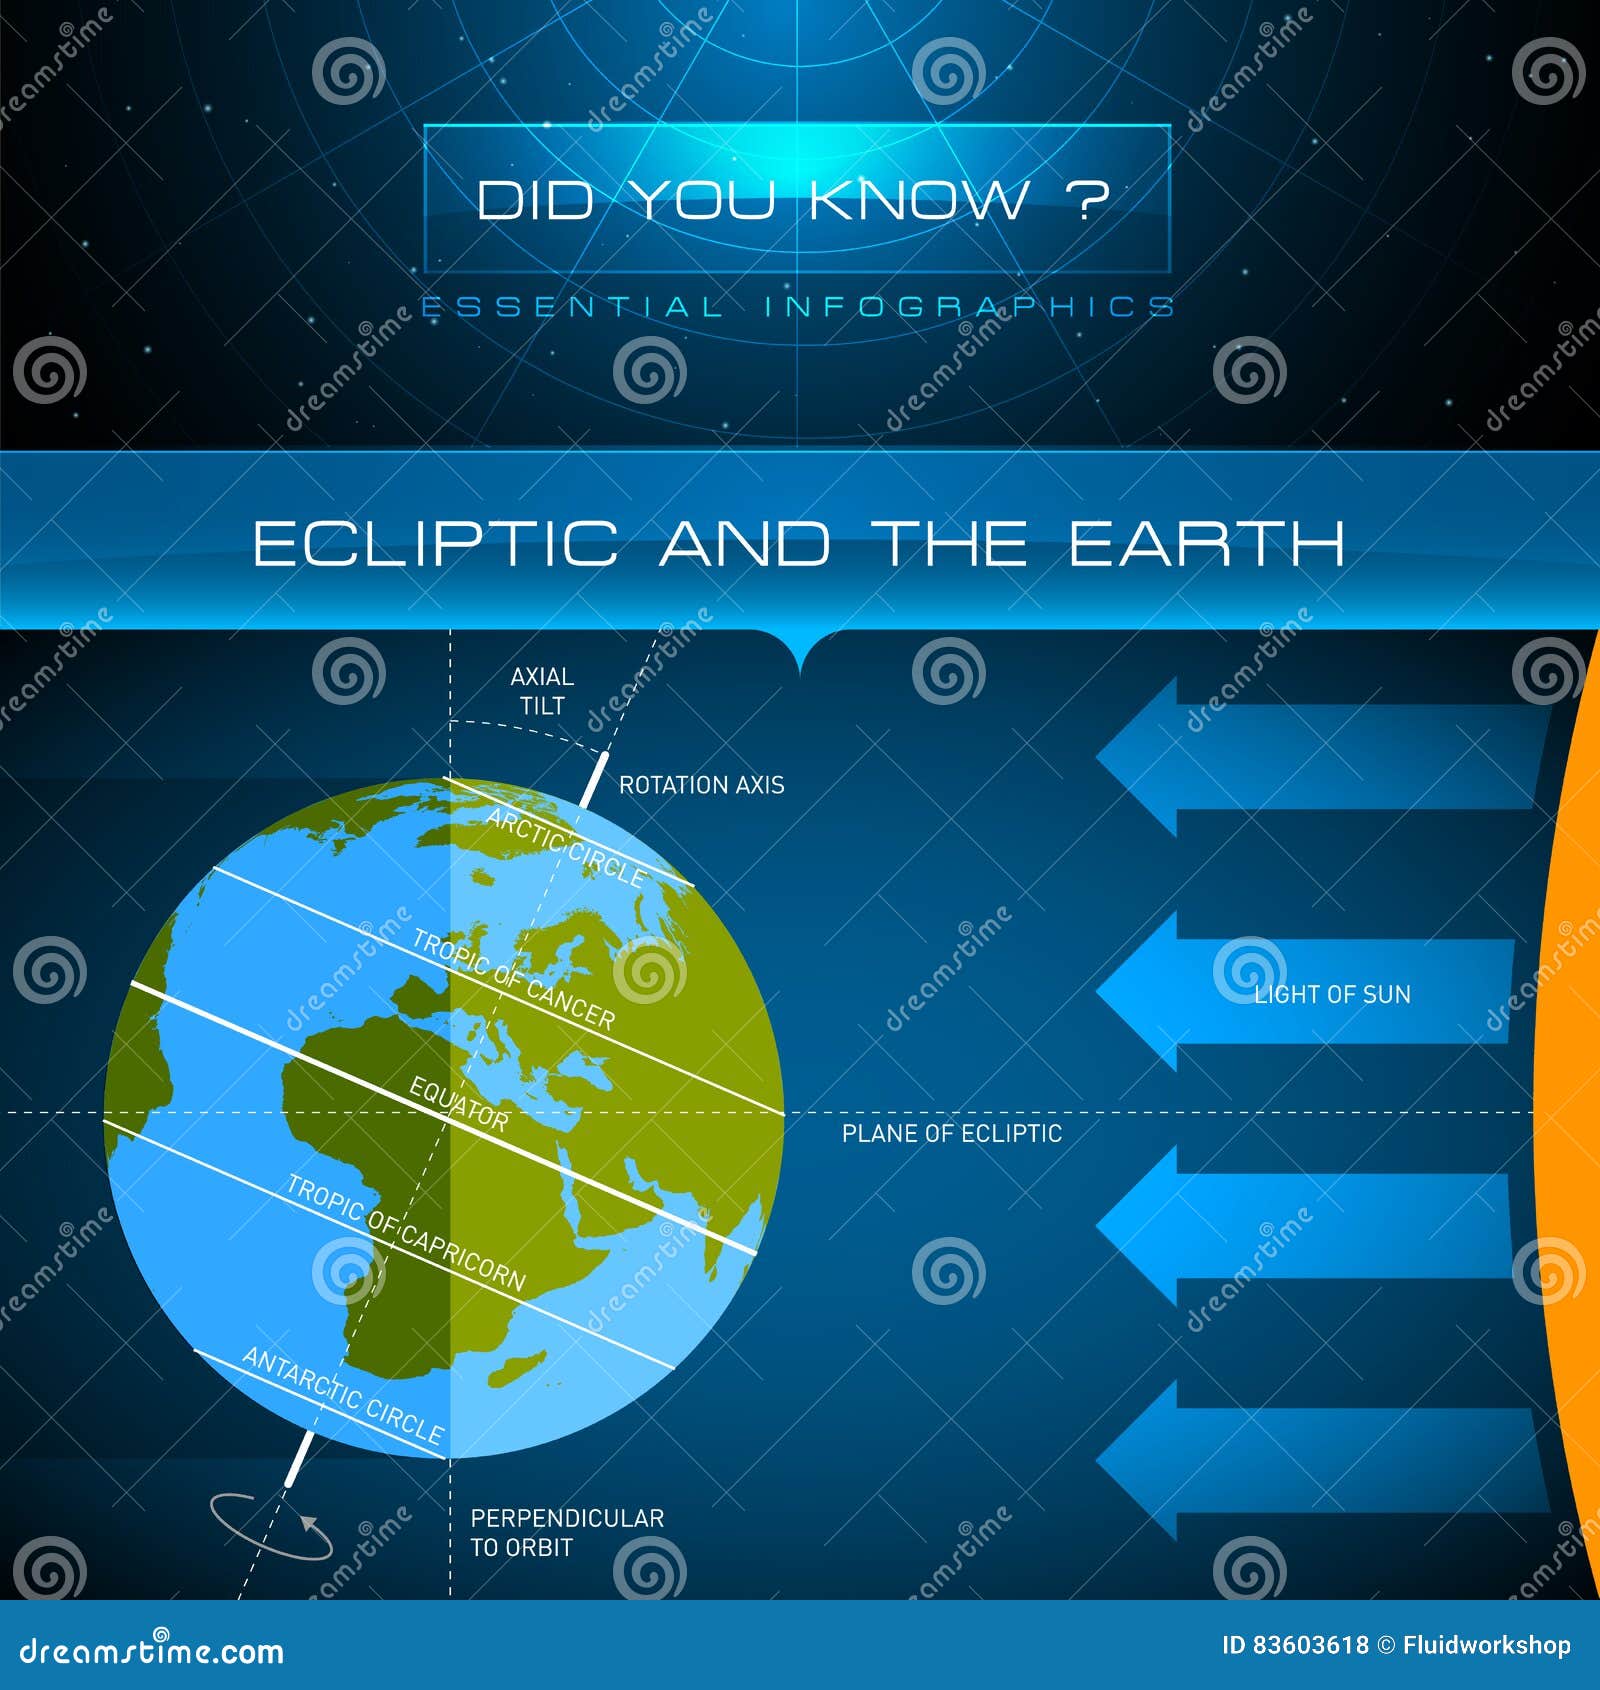  infographic - ecliptic and the earth